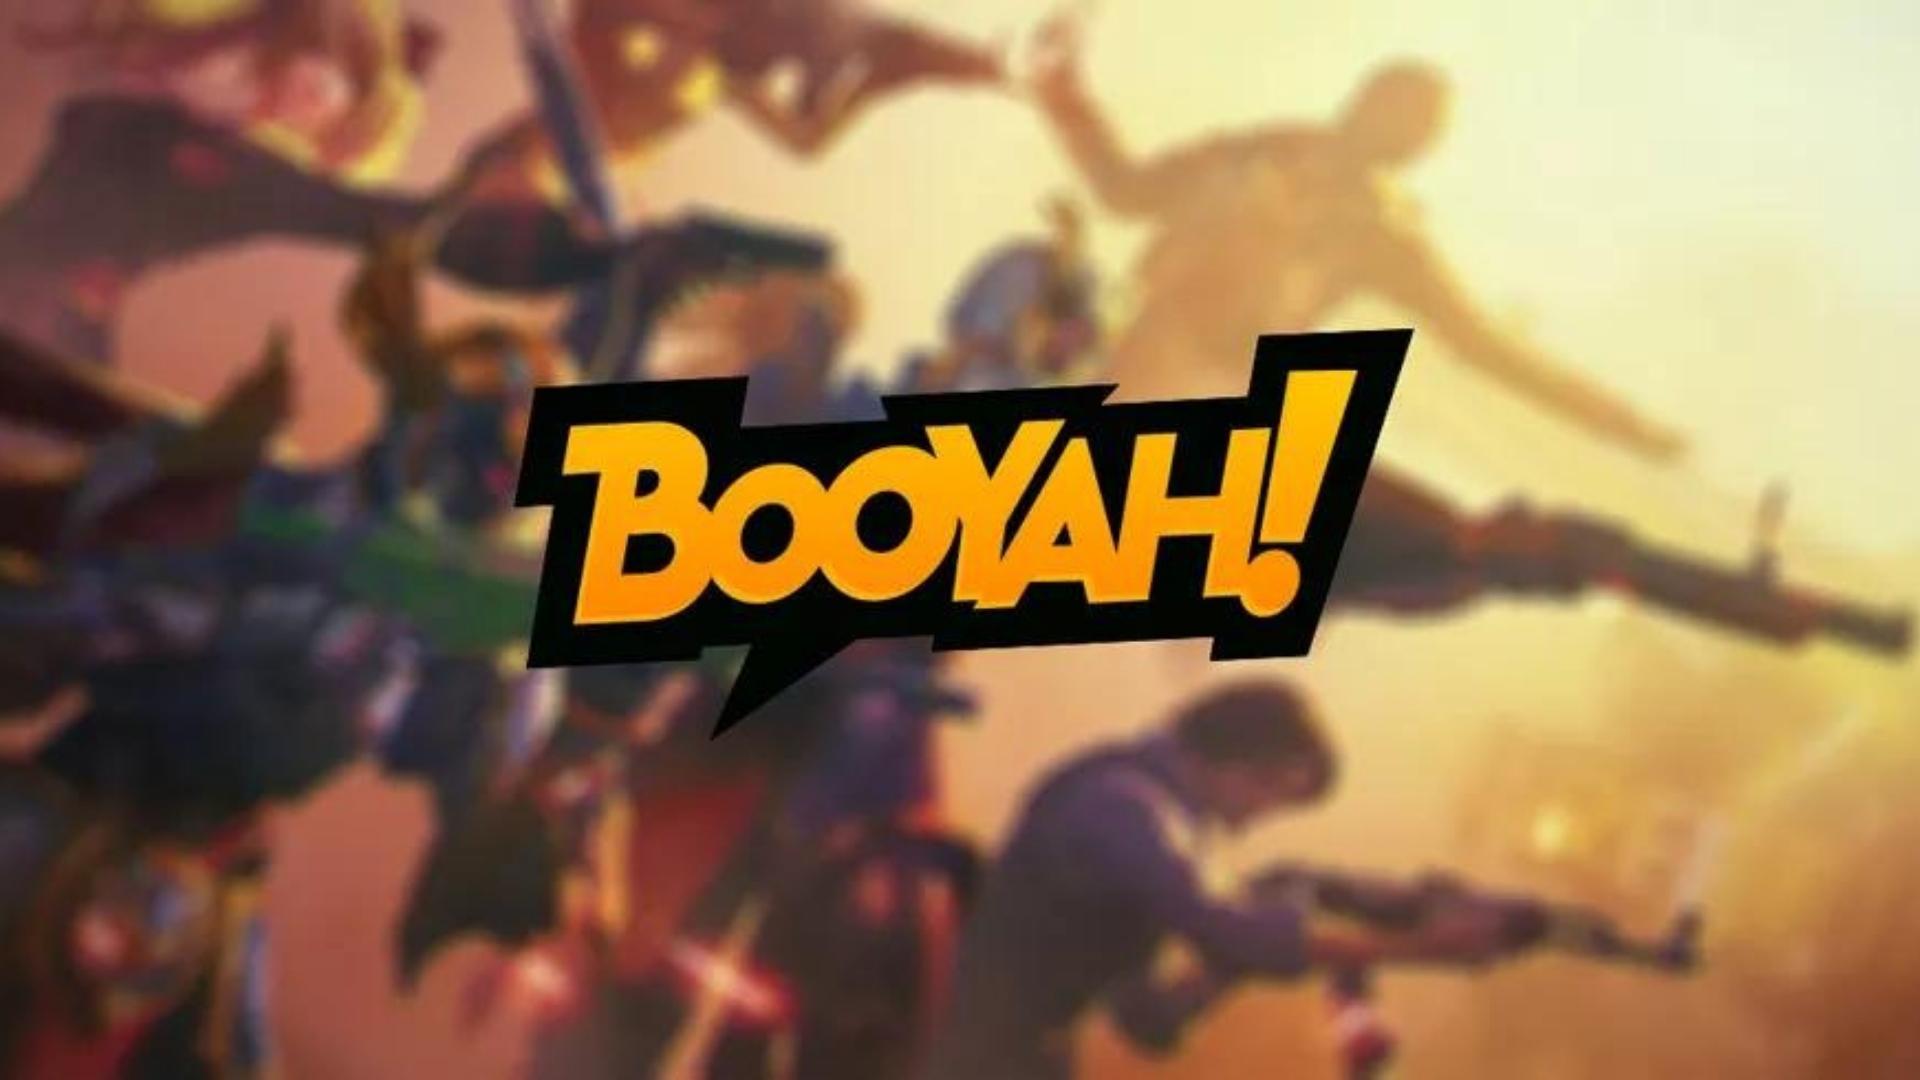 Garena makes changes and may end the operation of the Booyah